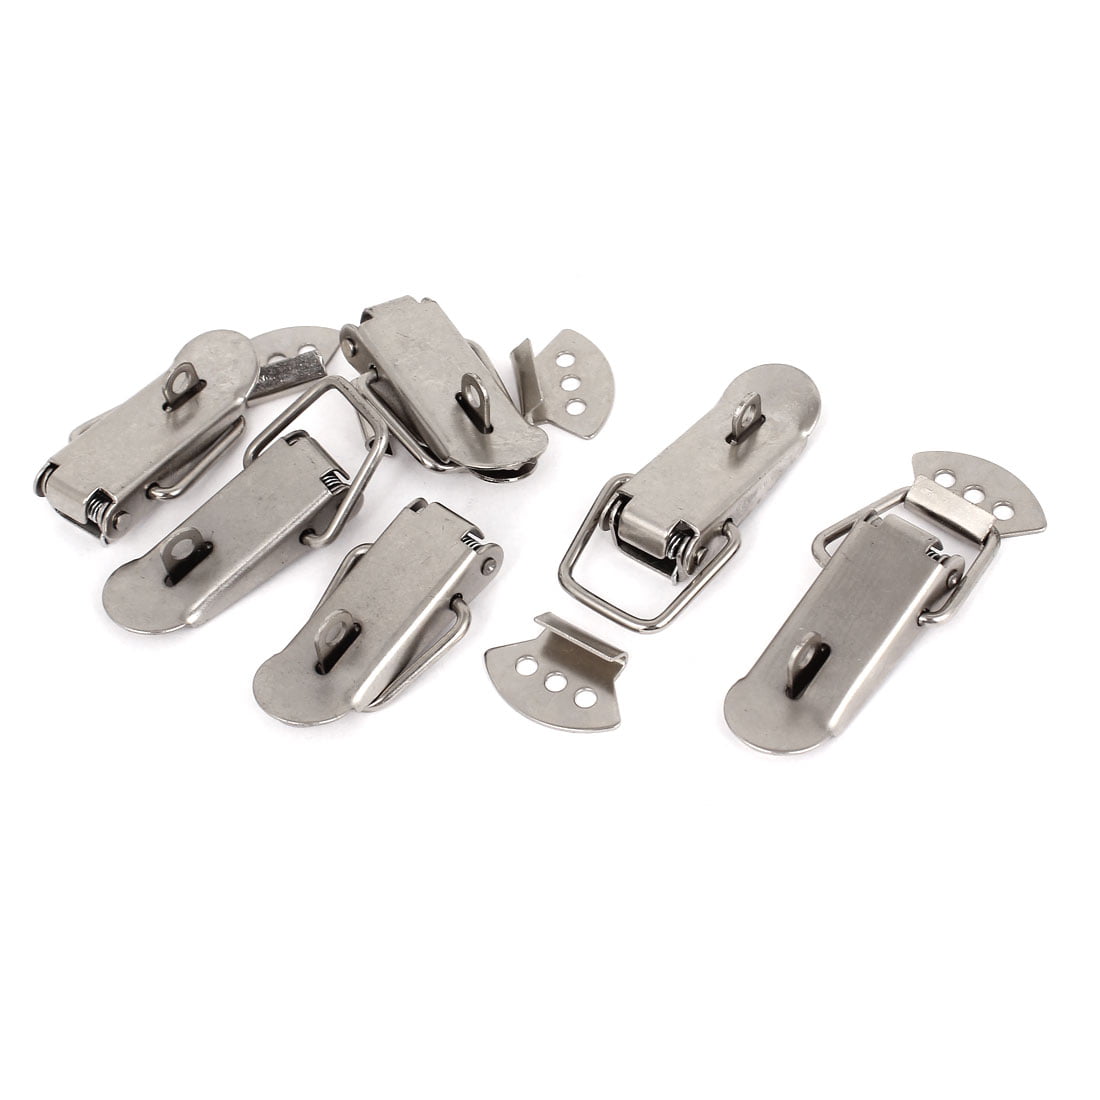 2 Set Stainless Steel Hardware Boxes Spring Loaded Toggle Latch Hasp 